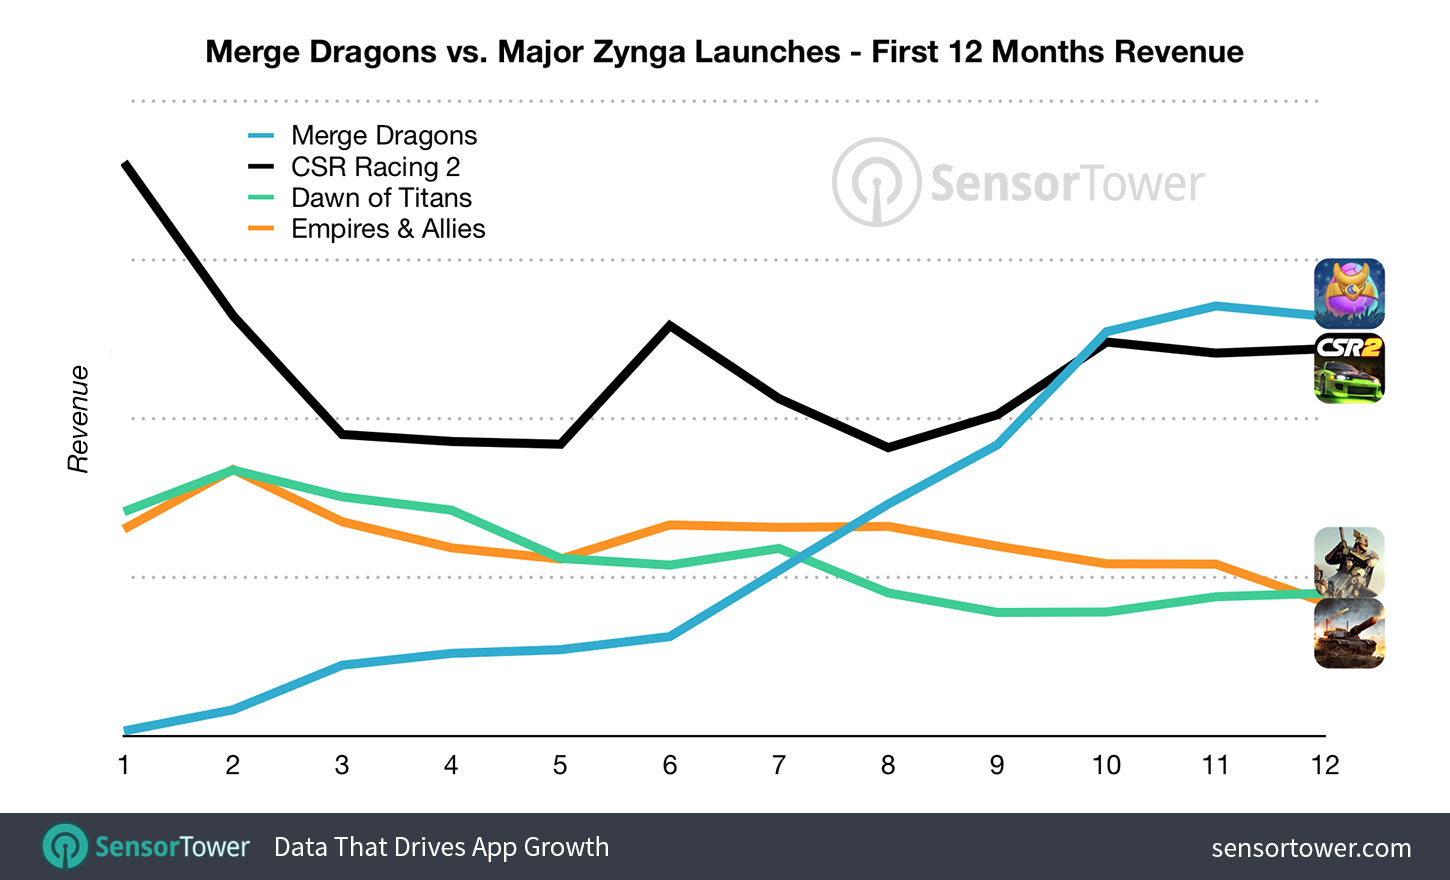 Chart showing the first 12 months revenue for major Zynga game launches including Merge Dragons